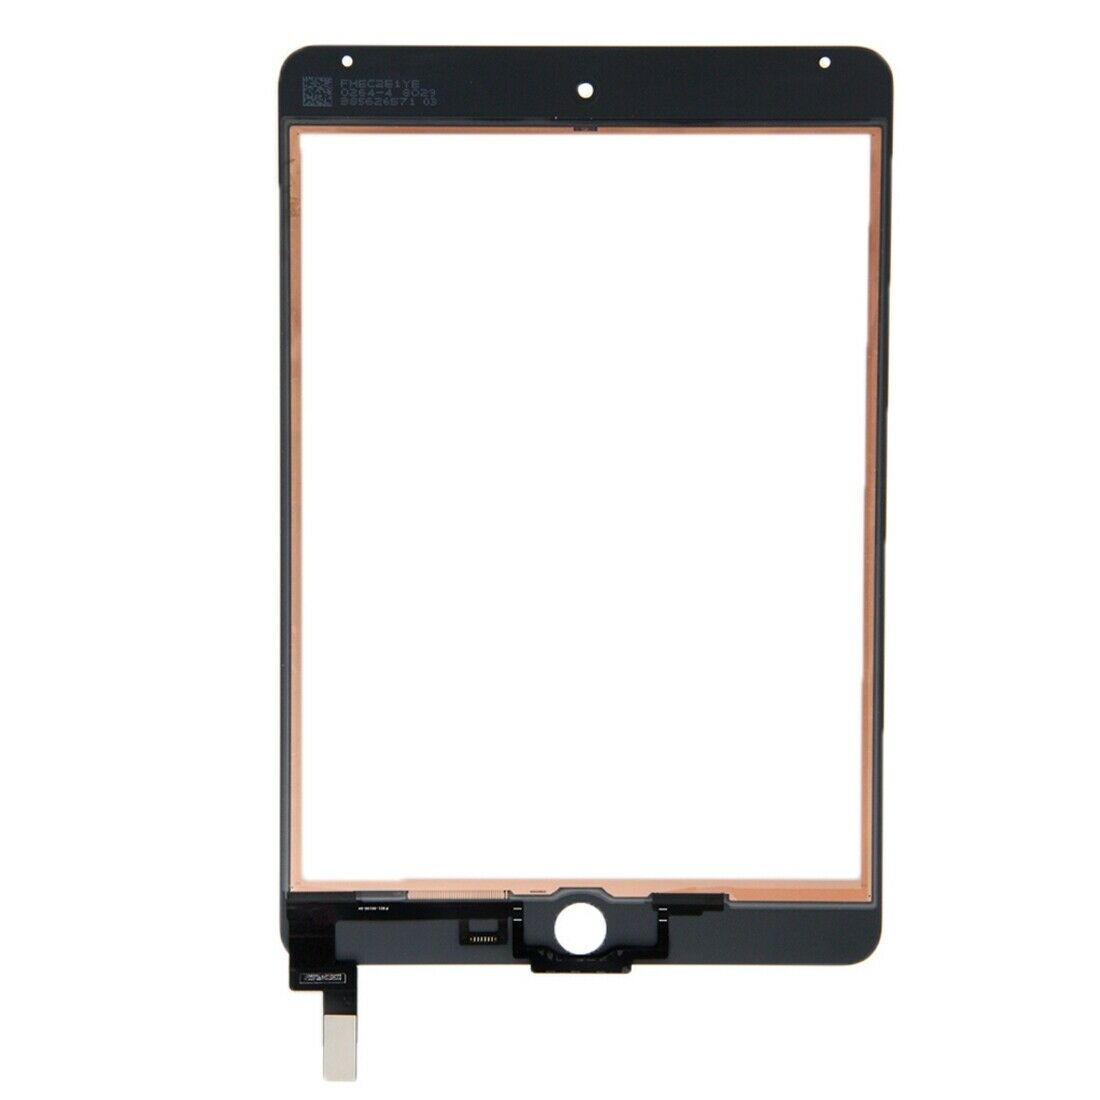 Apple iPad Mini 4 Replacement Touch Screen Digitizer - White for [product_price] - First Help Tech